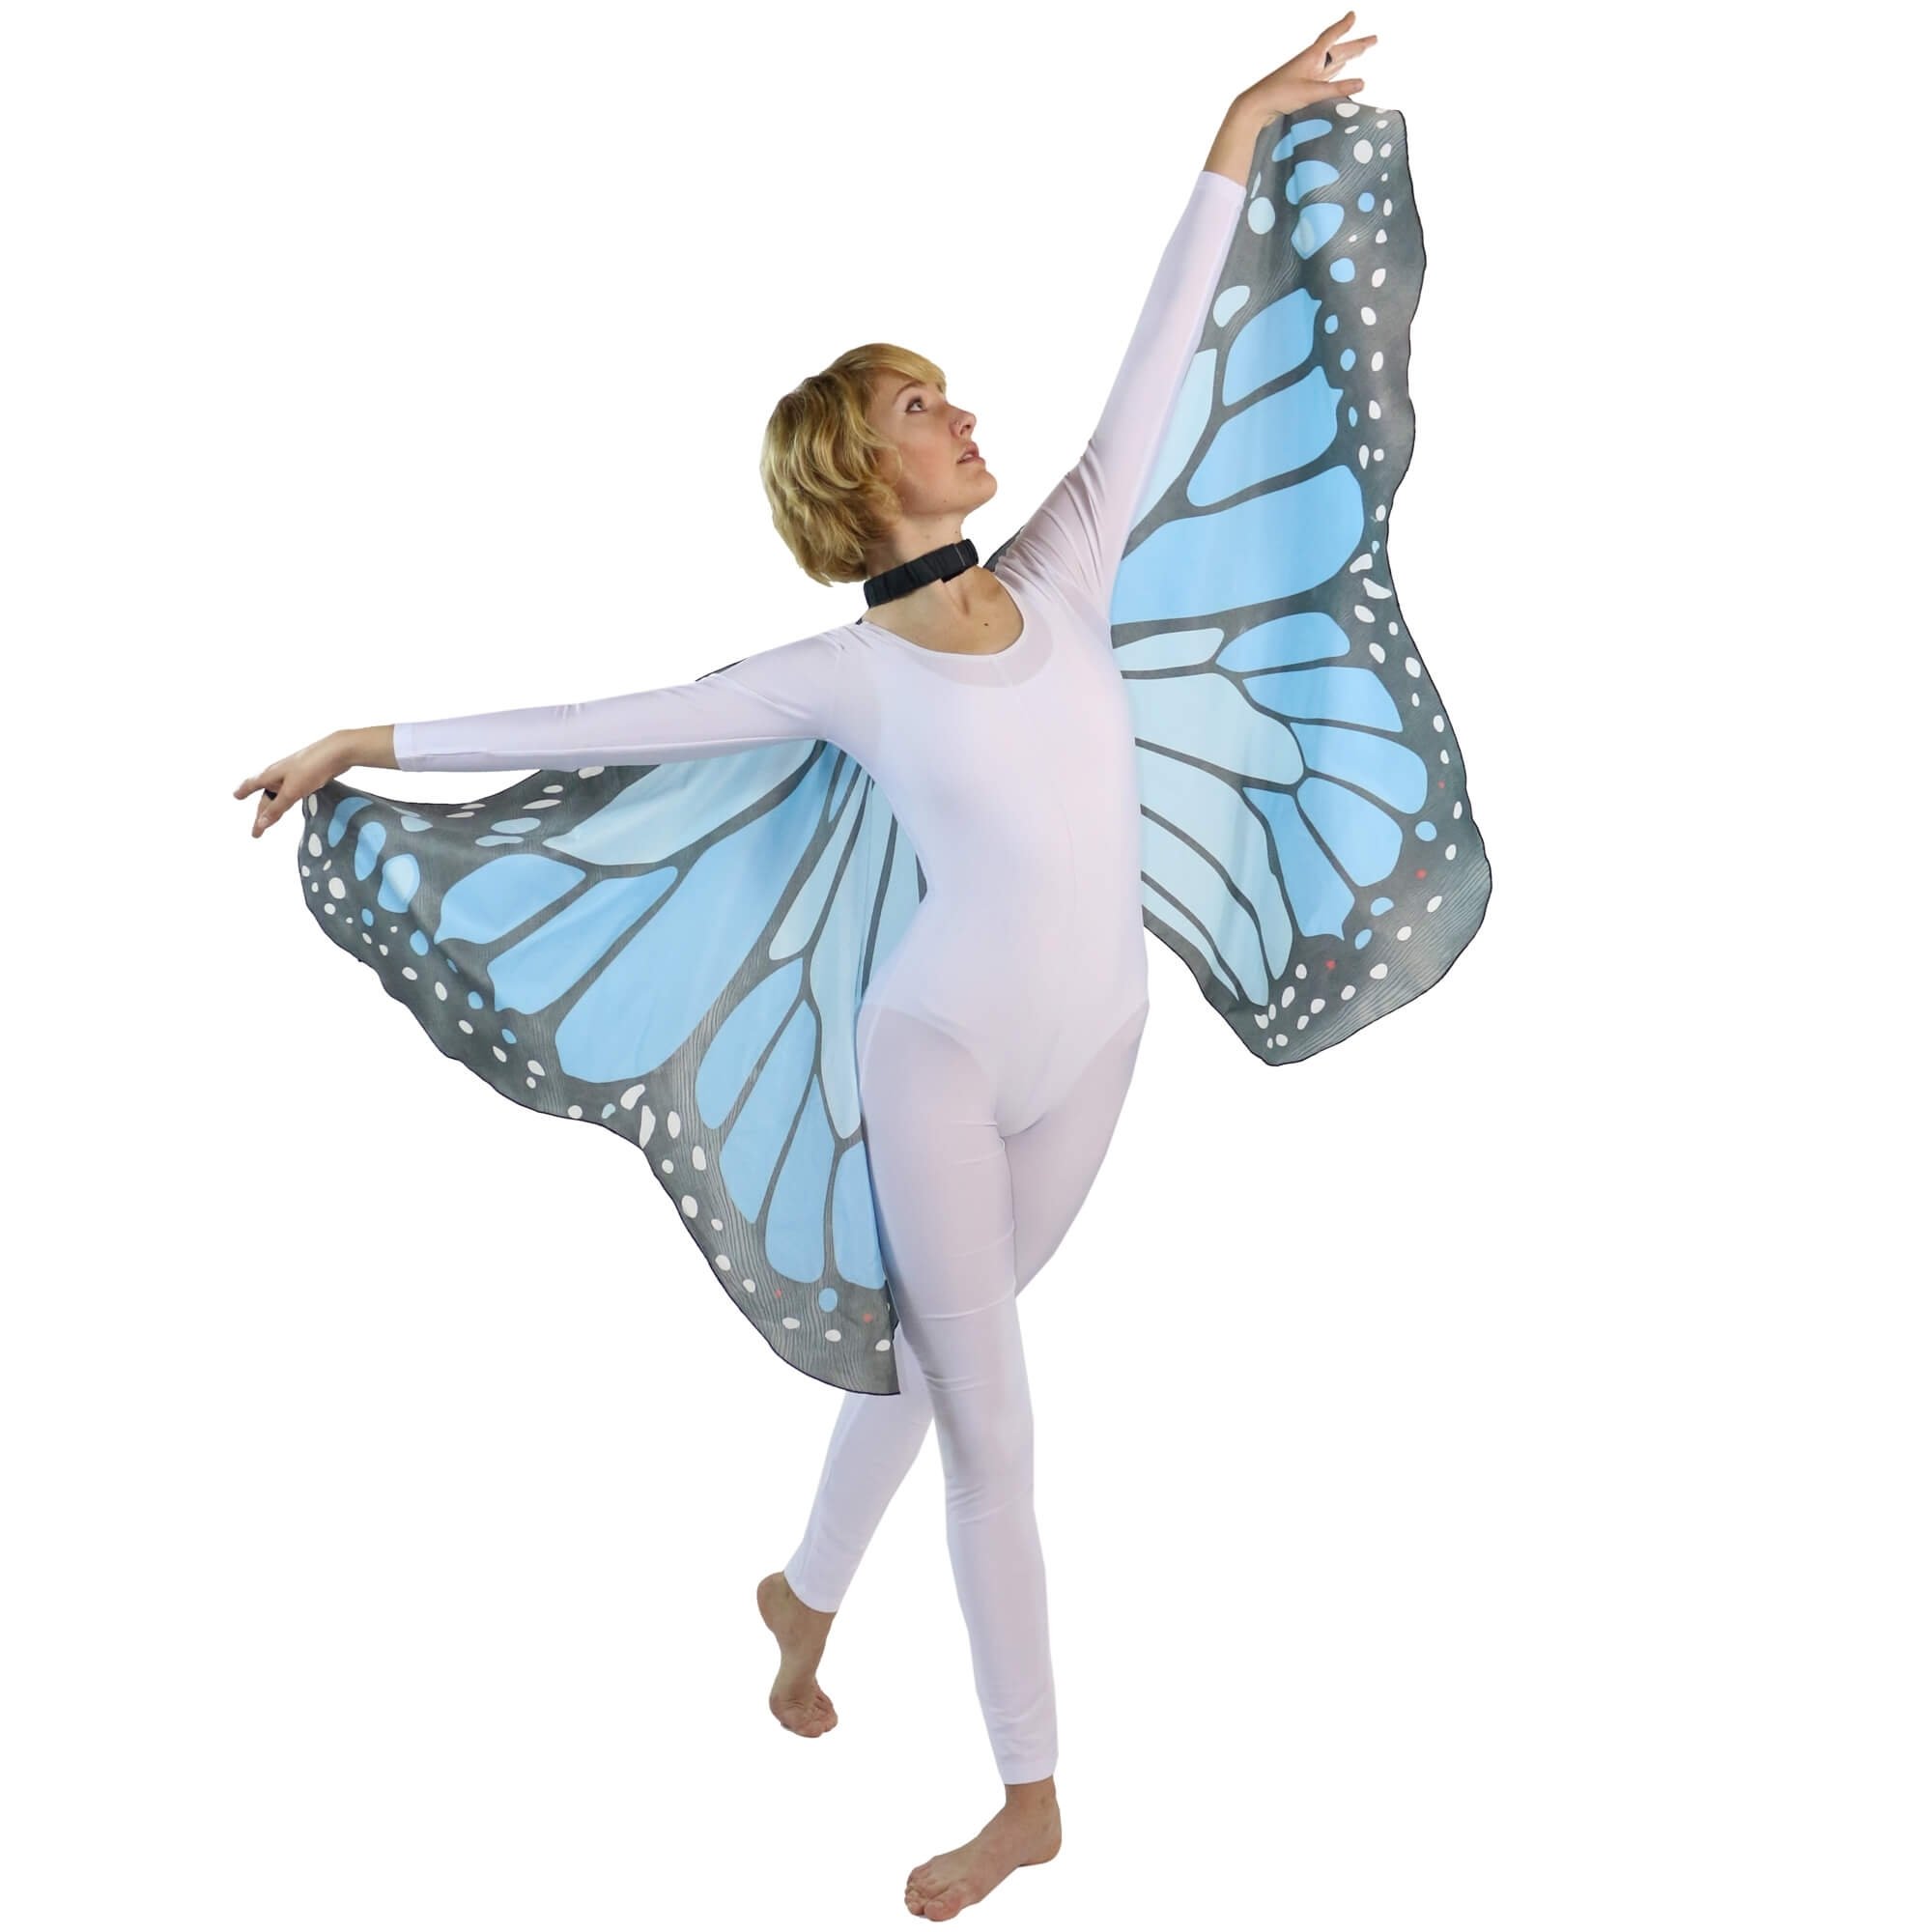 Danzcue Soft Butterfly Dance Wings - Click Image to Close